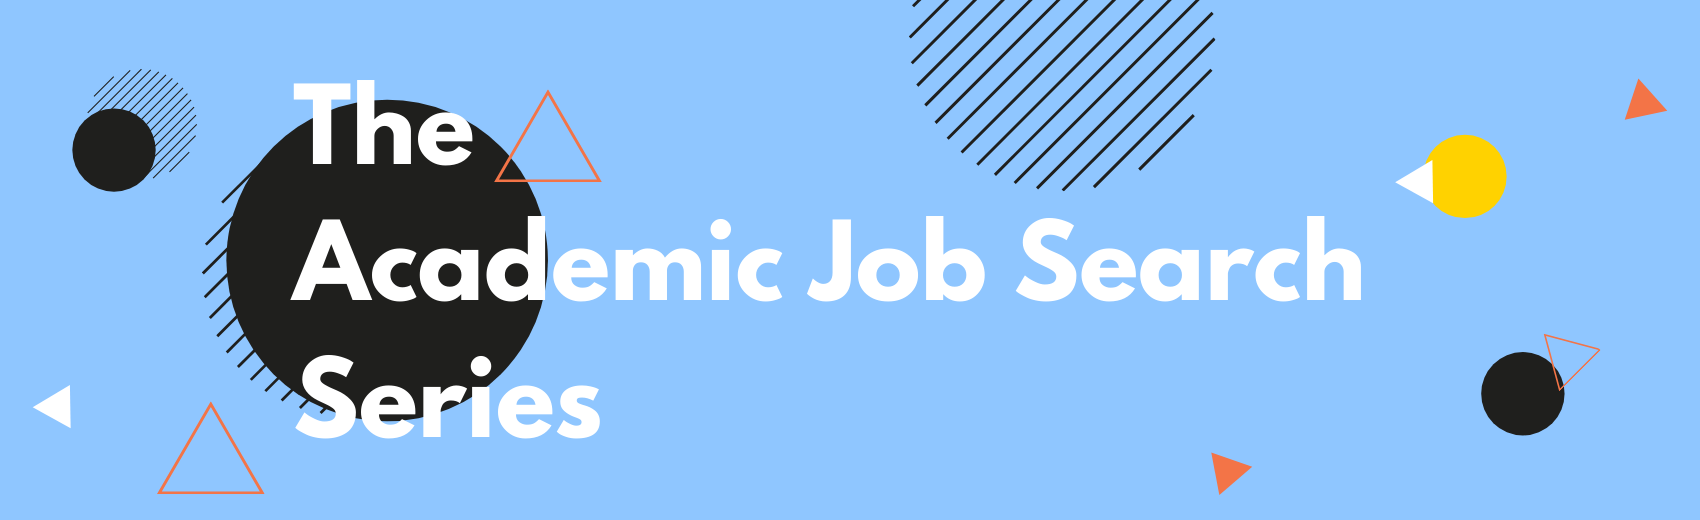 The-Academic-Job-Search-Series-Banner.png